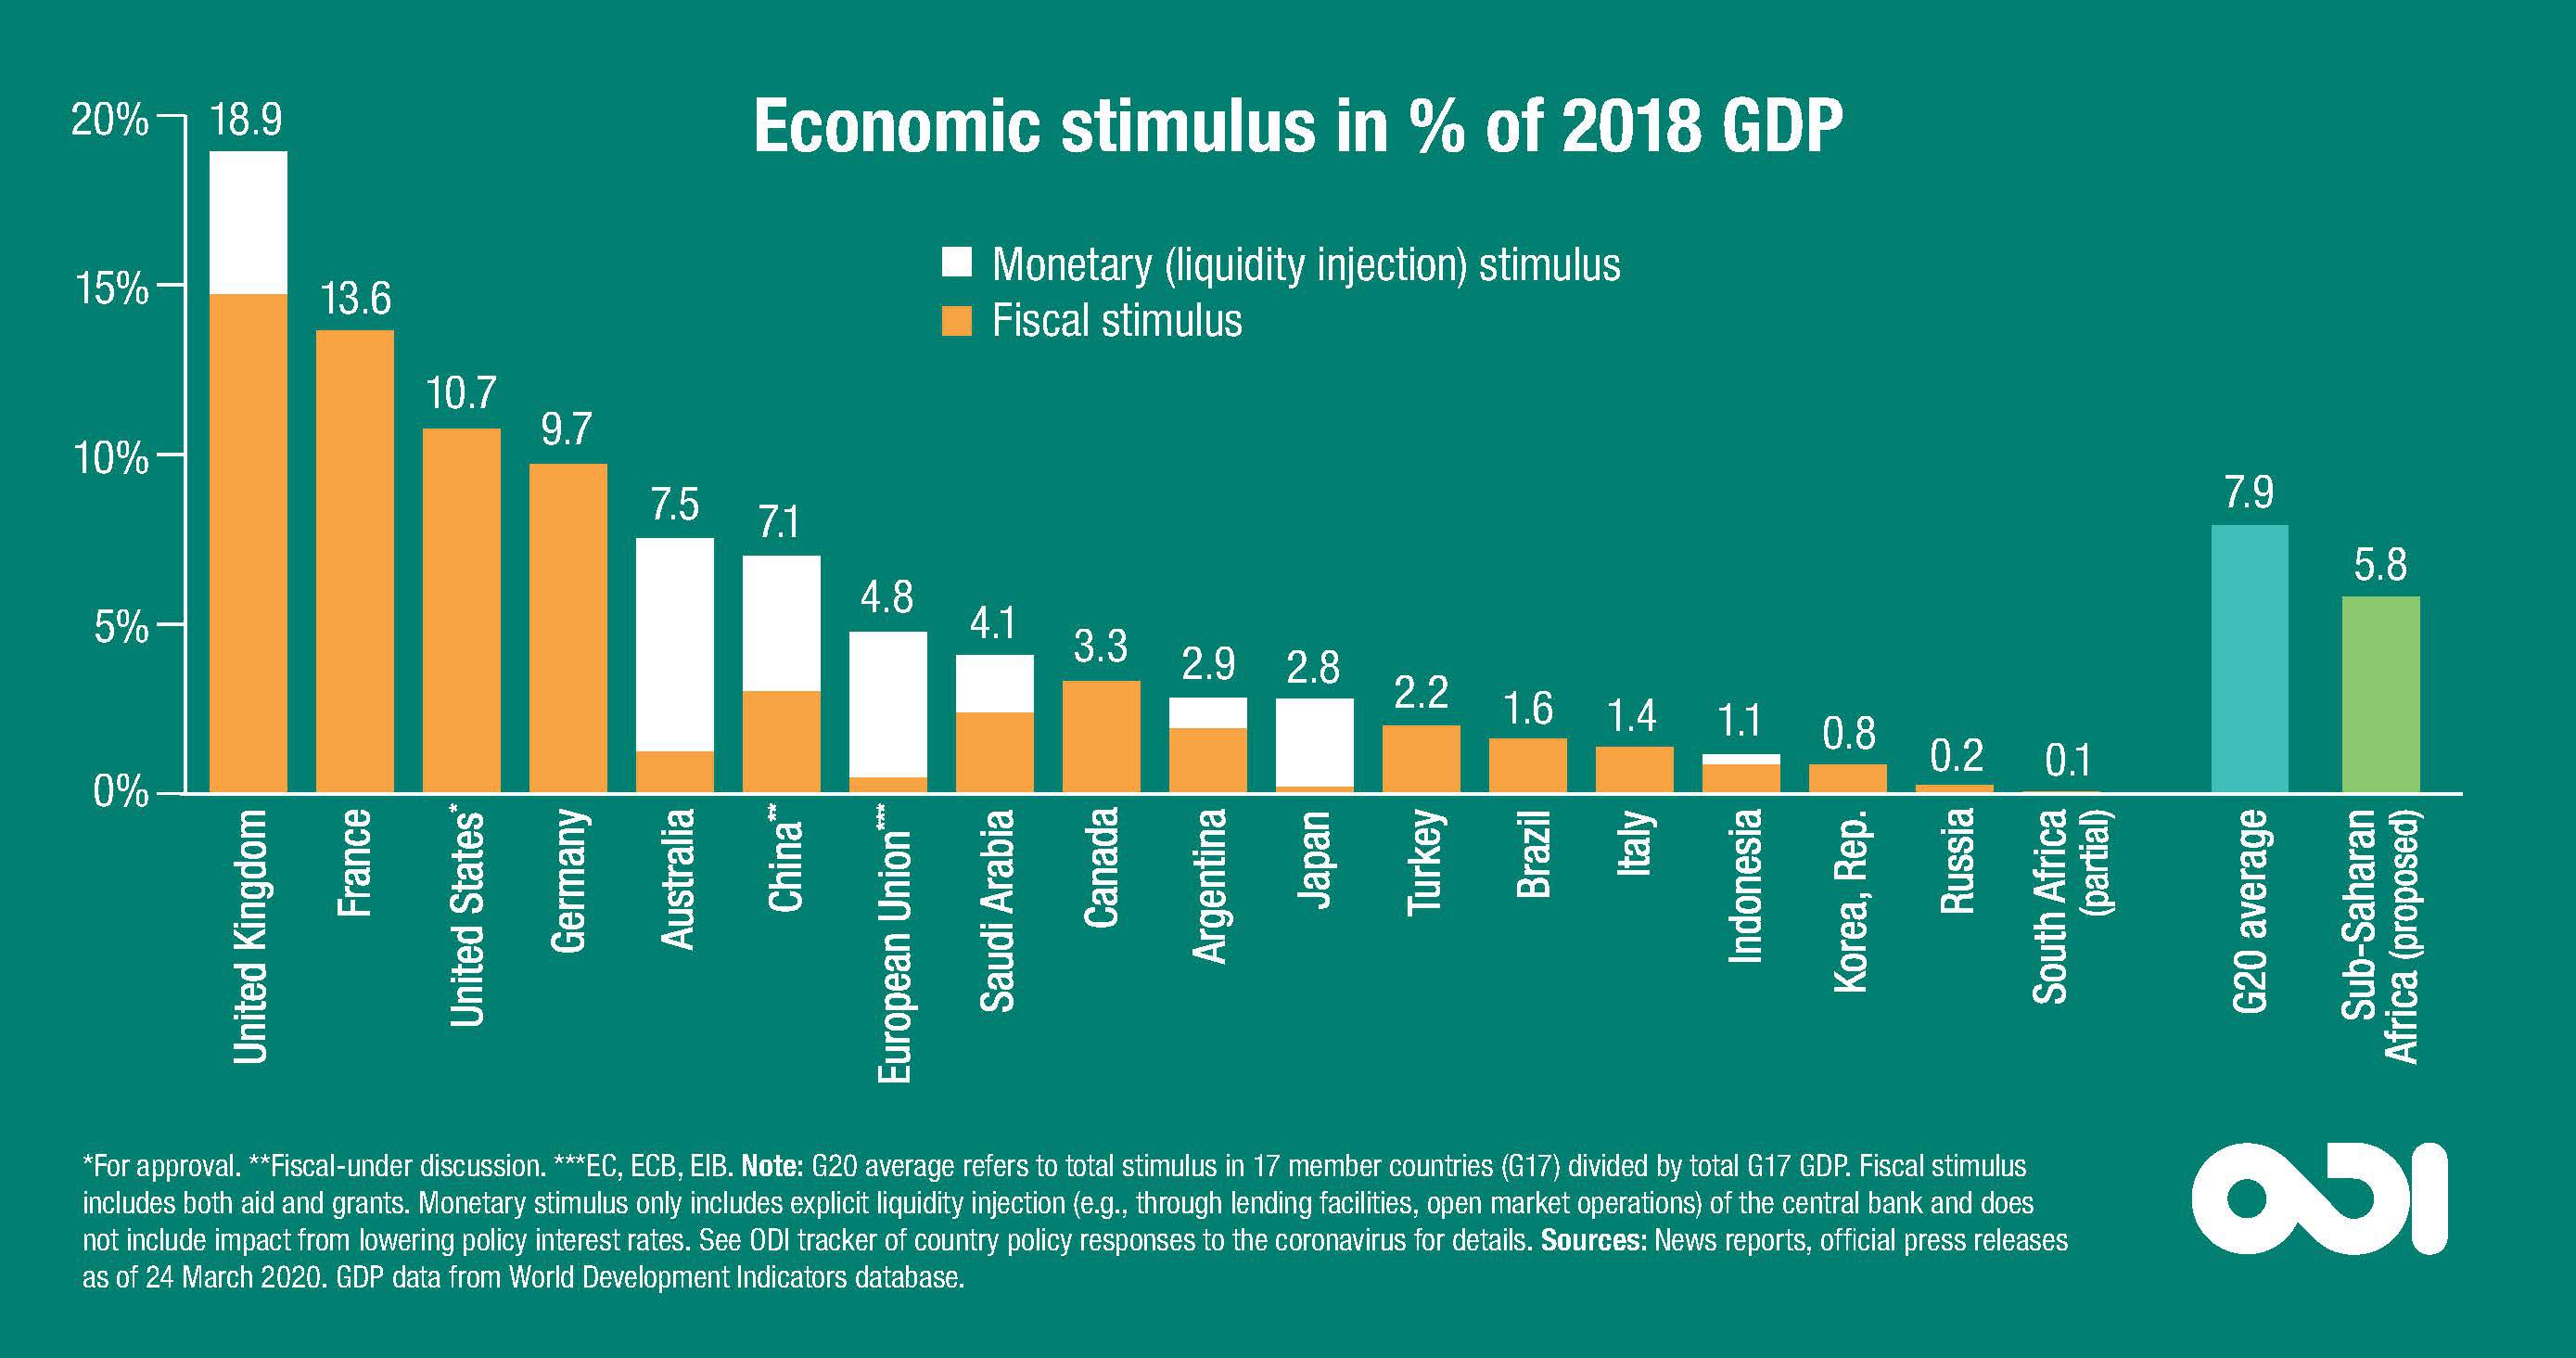 Economic stimulus as a % of 2018 GDP